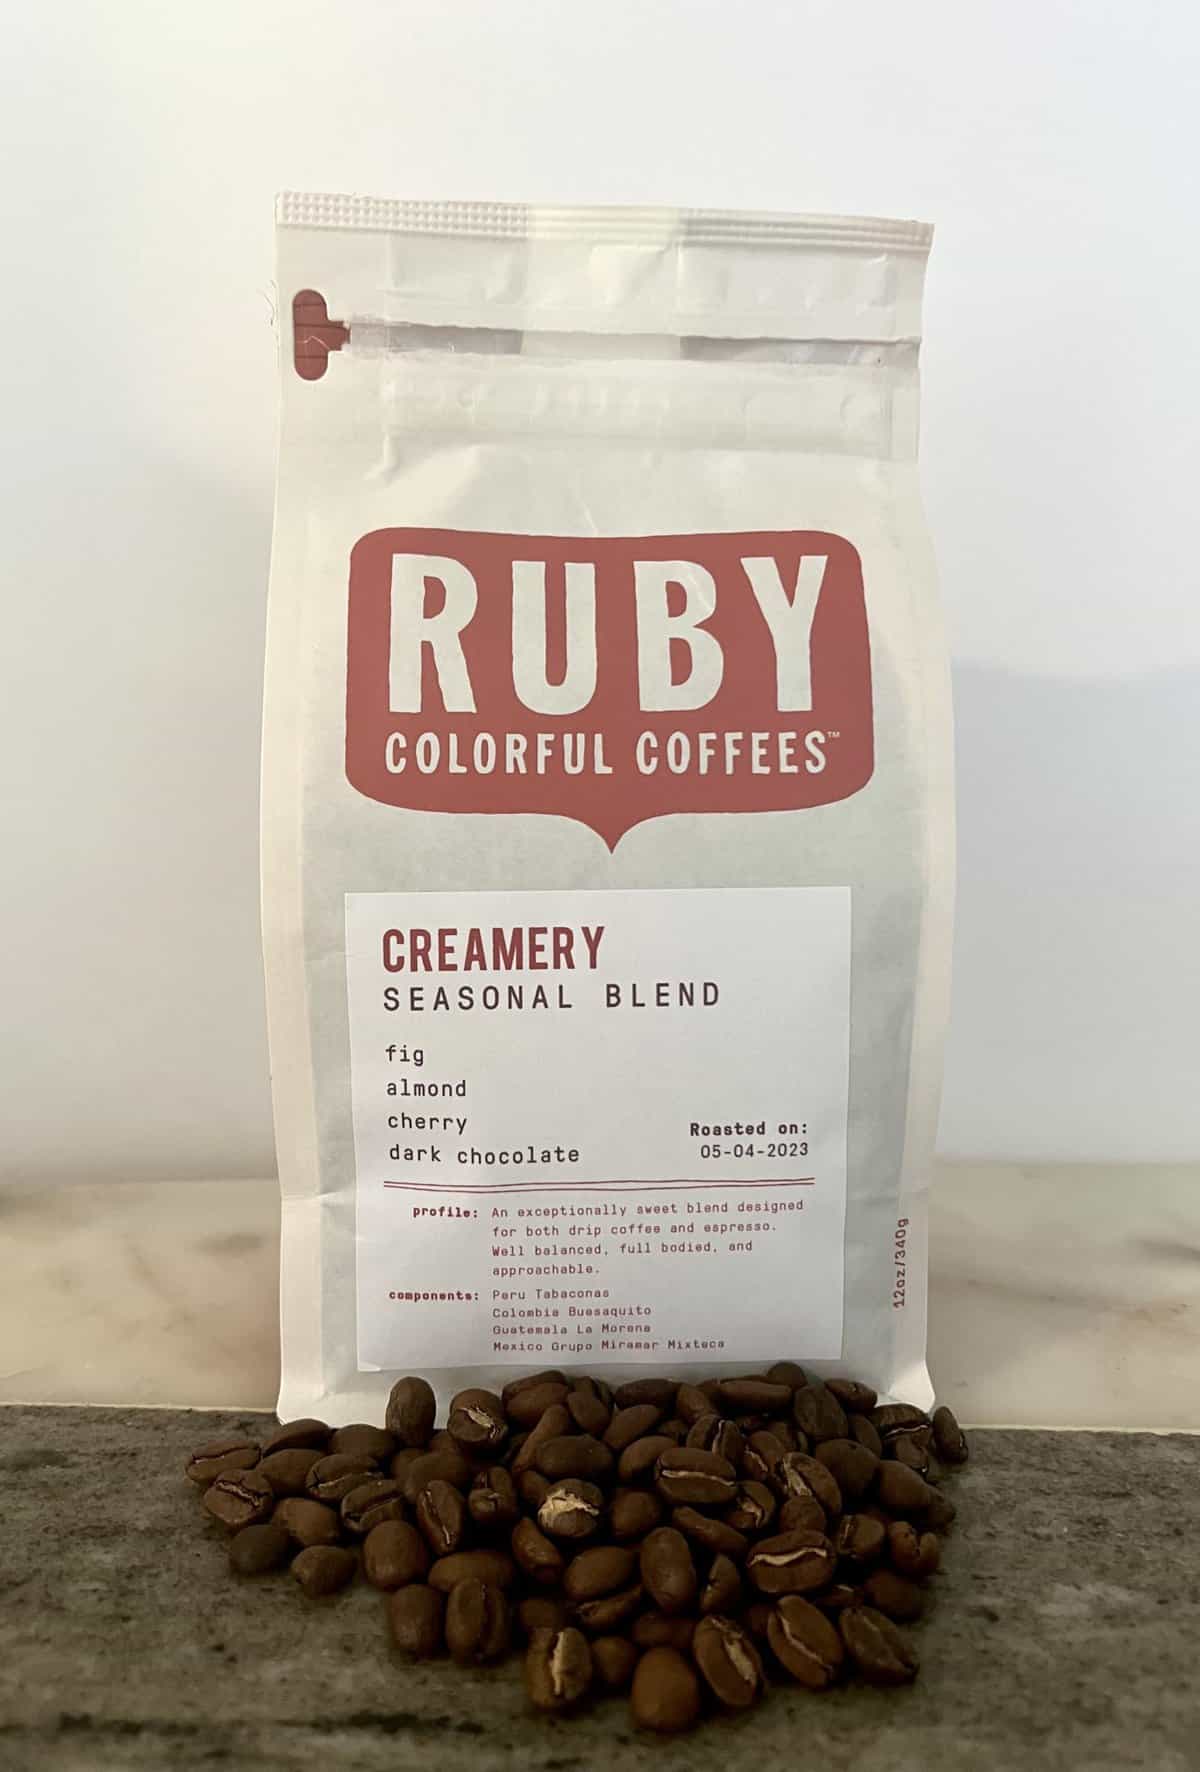 Creamery-Seasonal-Blend-coffee-stands-on-coffee-beans-scaled